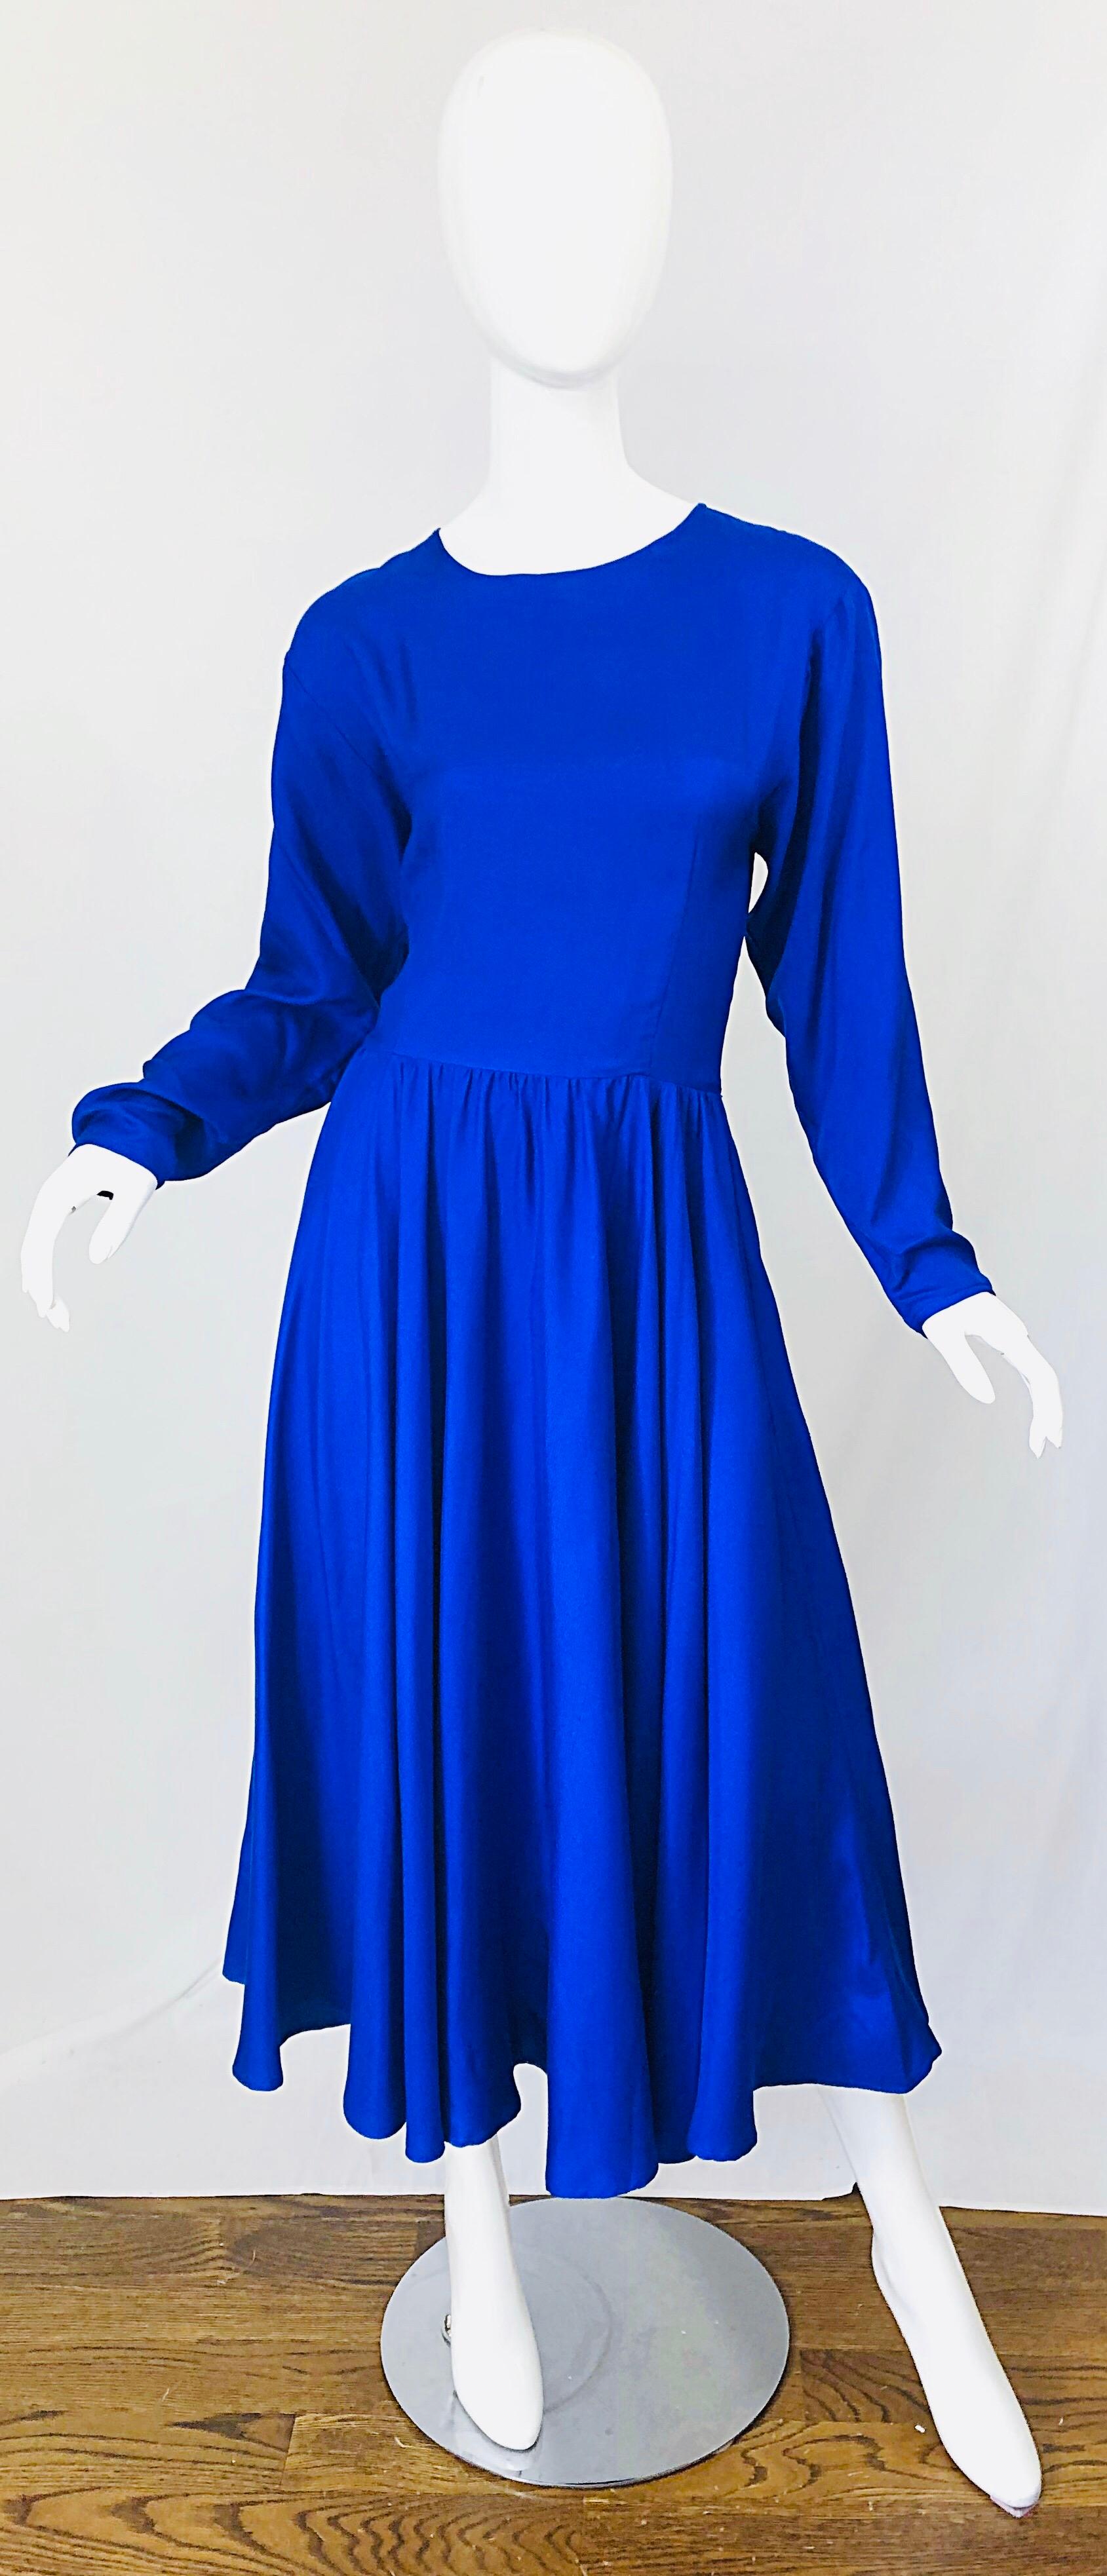 Beautiful DYNASTY royal blue late 1970s silk long dolman sleeve midi dress! Features a slight dolman sleeve that began to trend in the late 70s and early 80s. Beautiful and flattering fit, with so much attention to details. Hidden zipper up the back